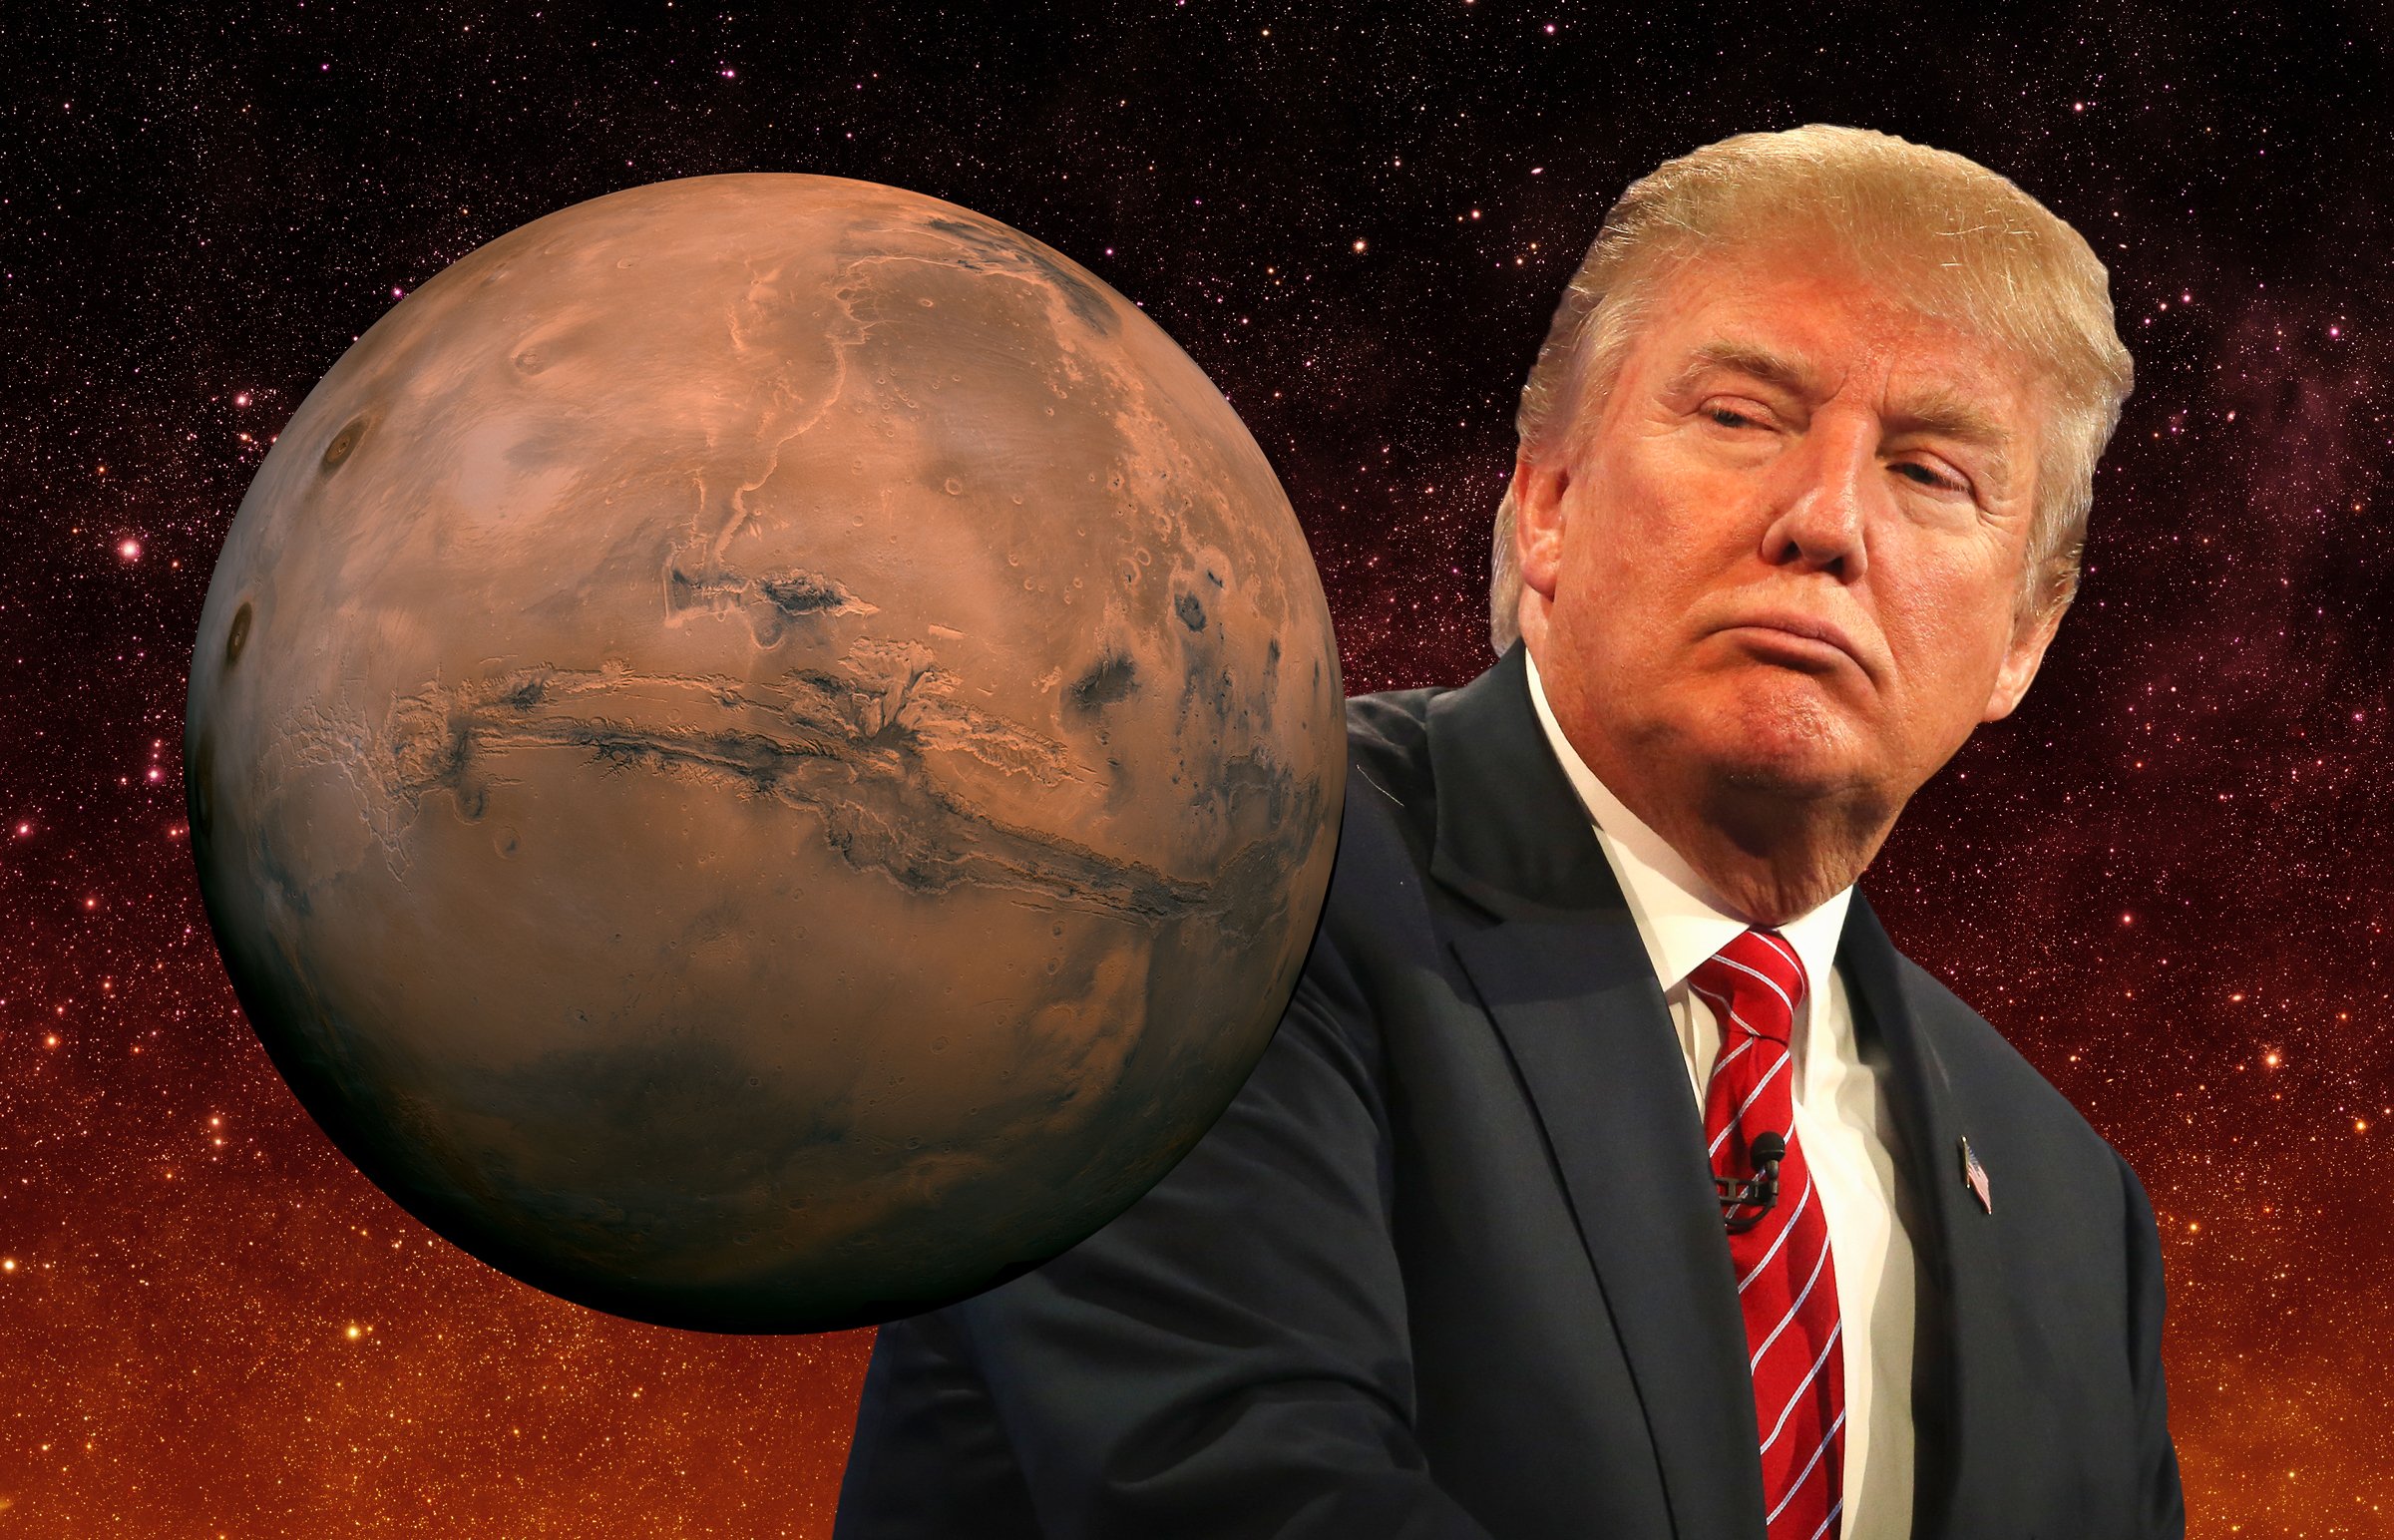 Trump Offered Nasa Unlimited Budget Instead For Sending People To Mars